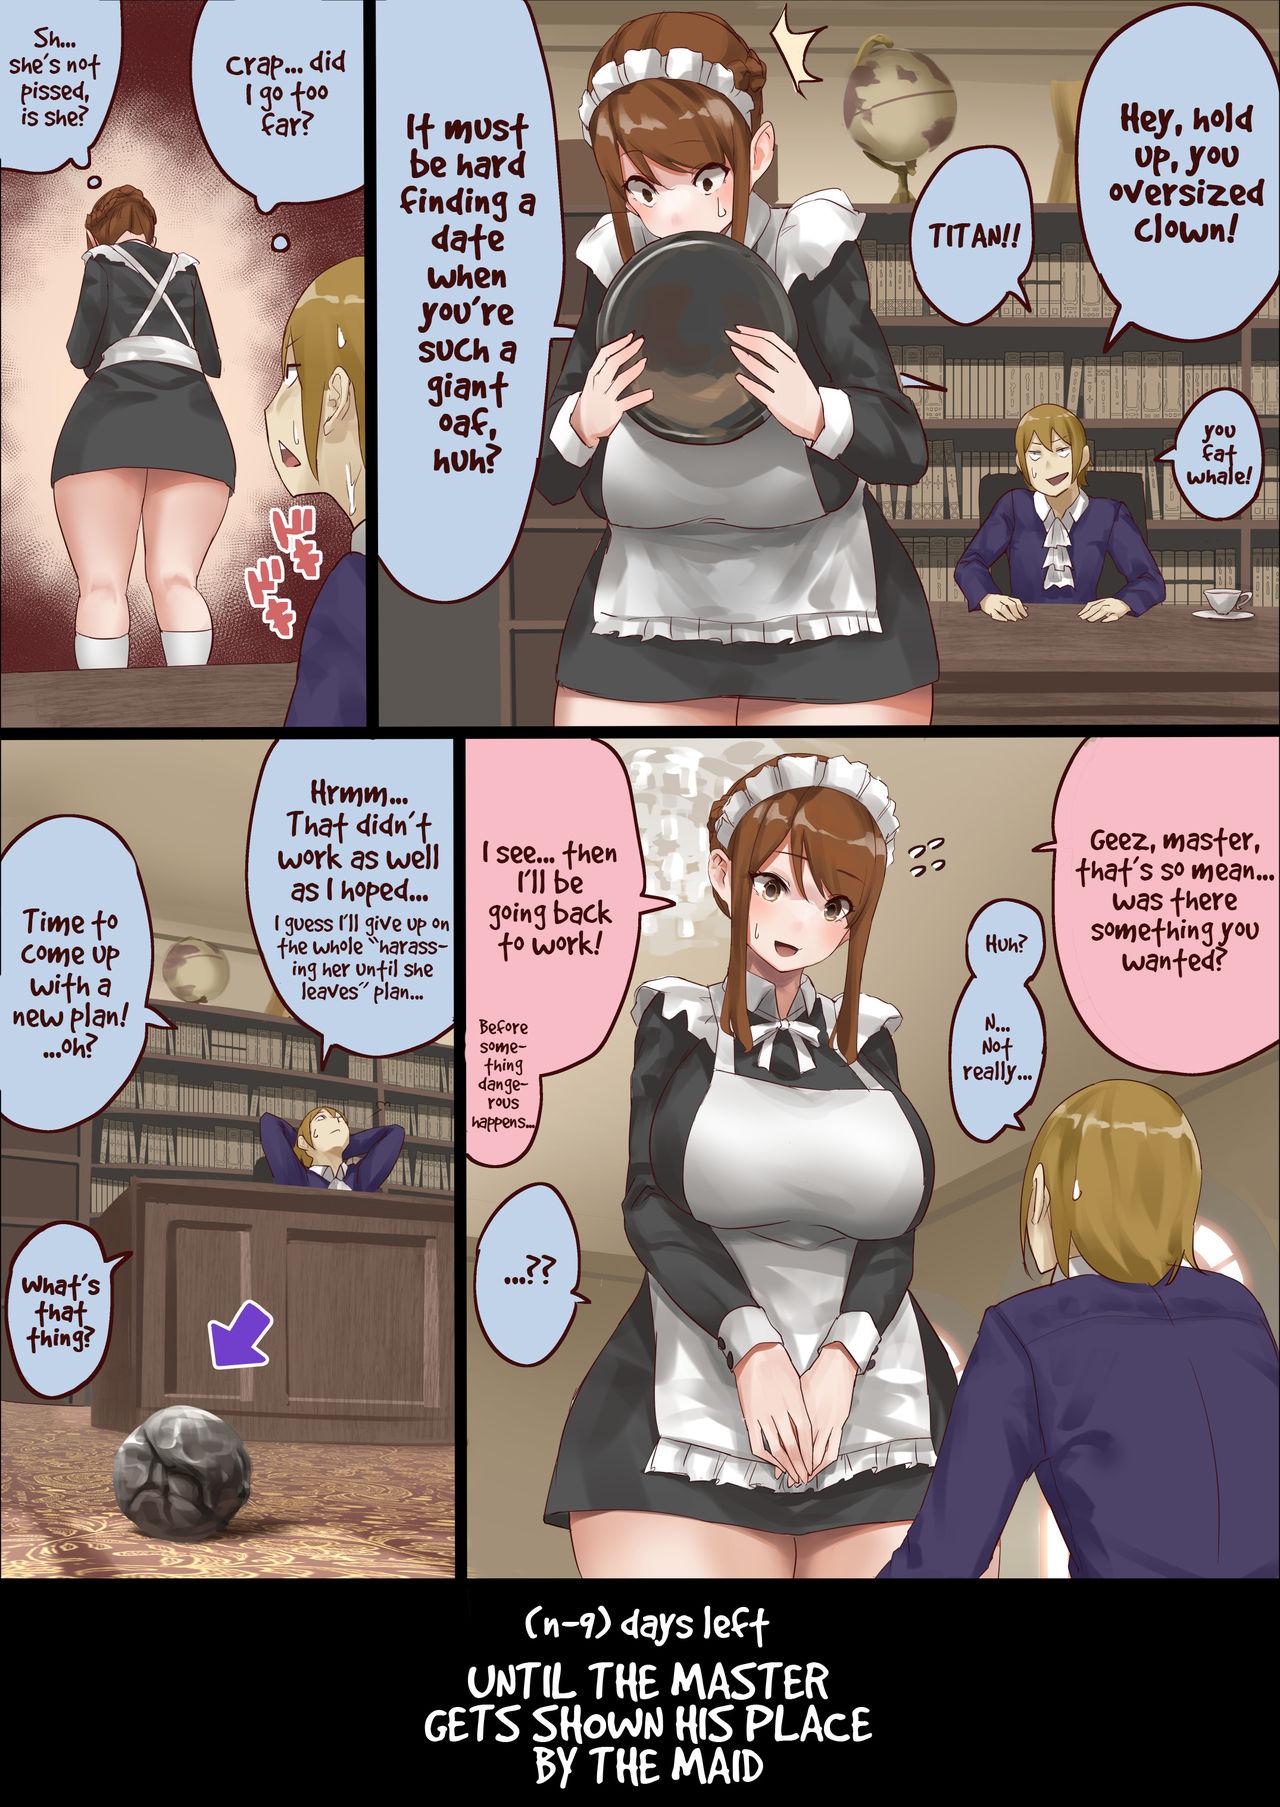 Chicks master and maid - Original Best - Page 10